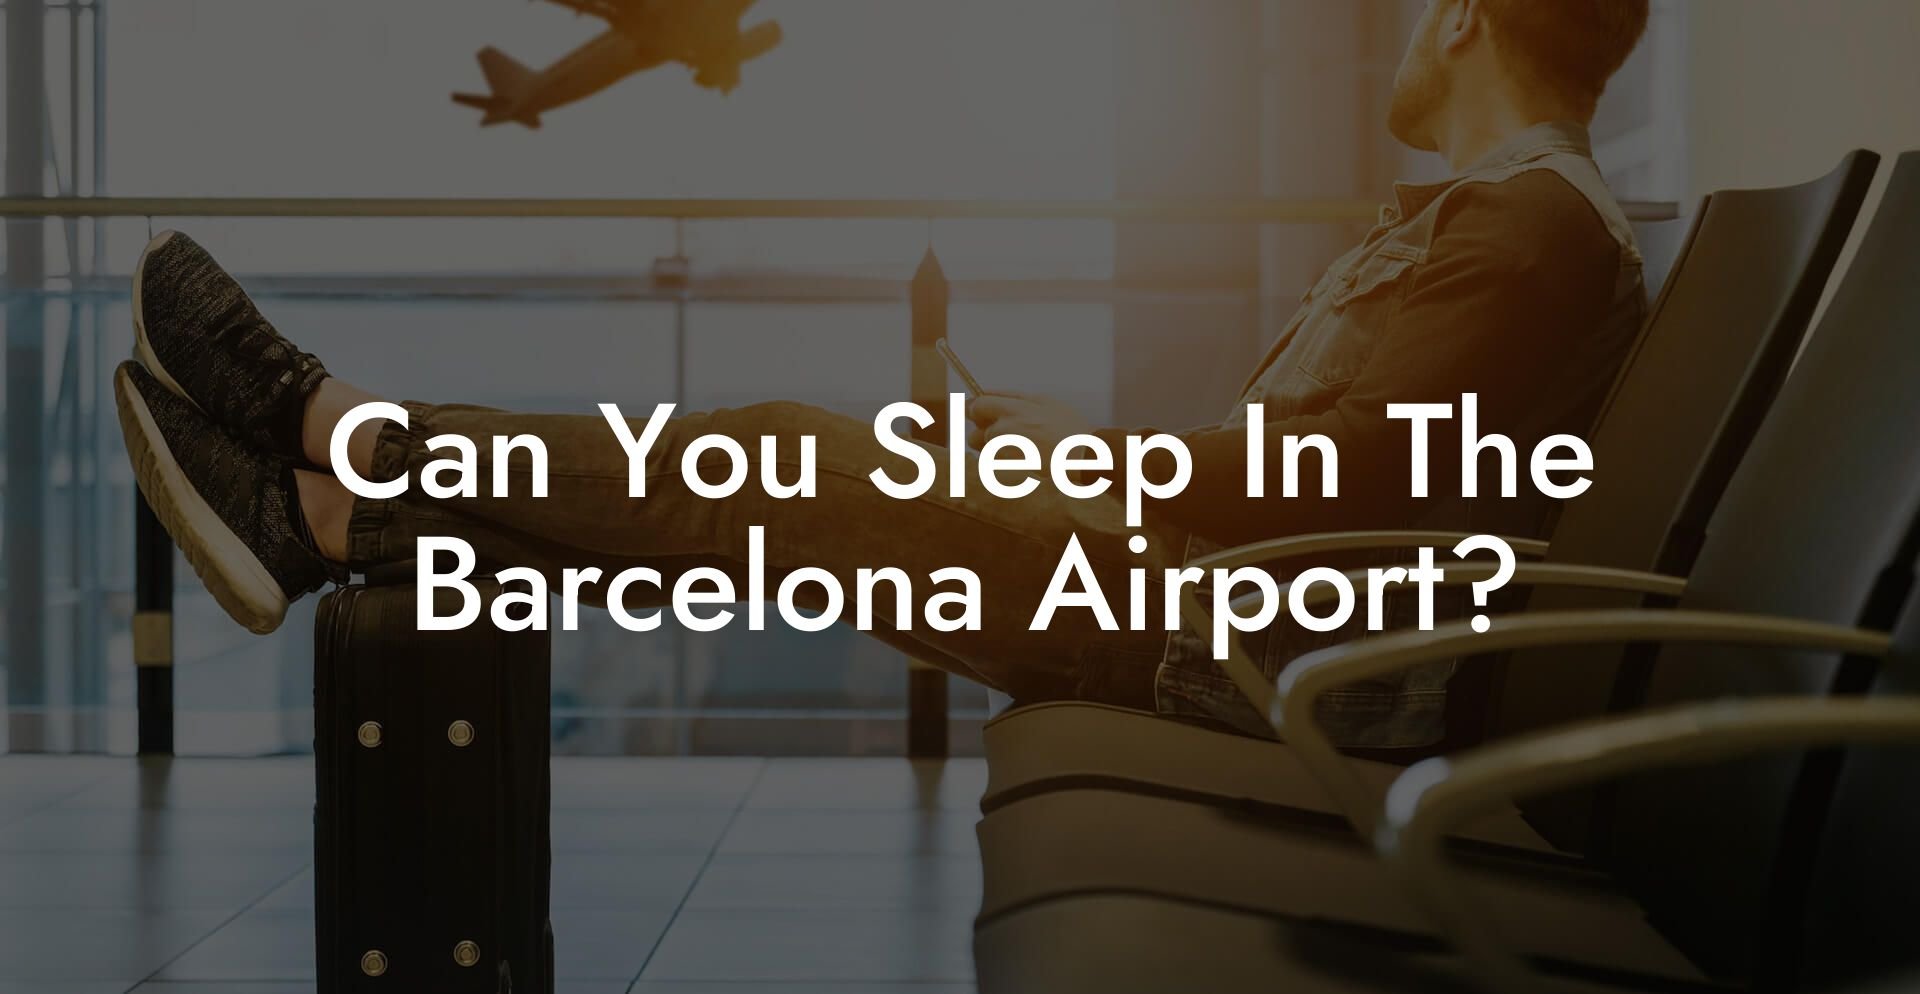 Can You Sleep In The Barcelona Airport?